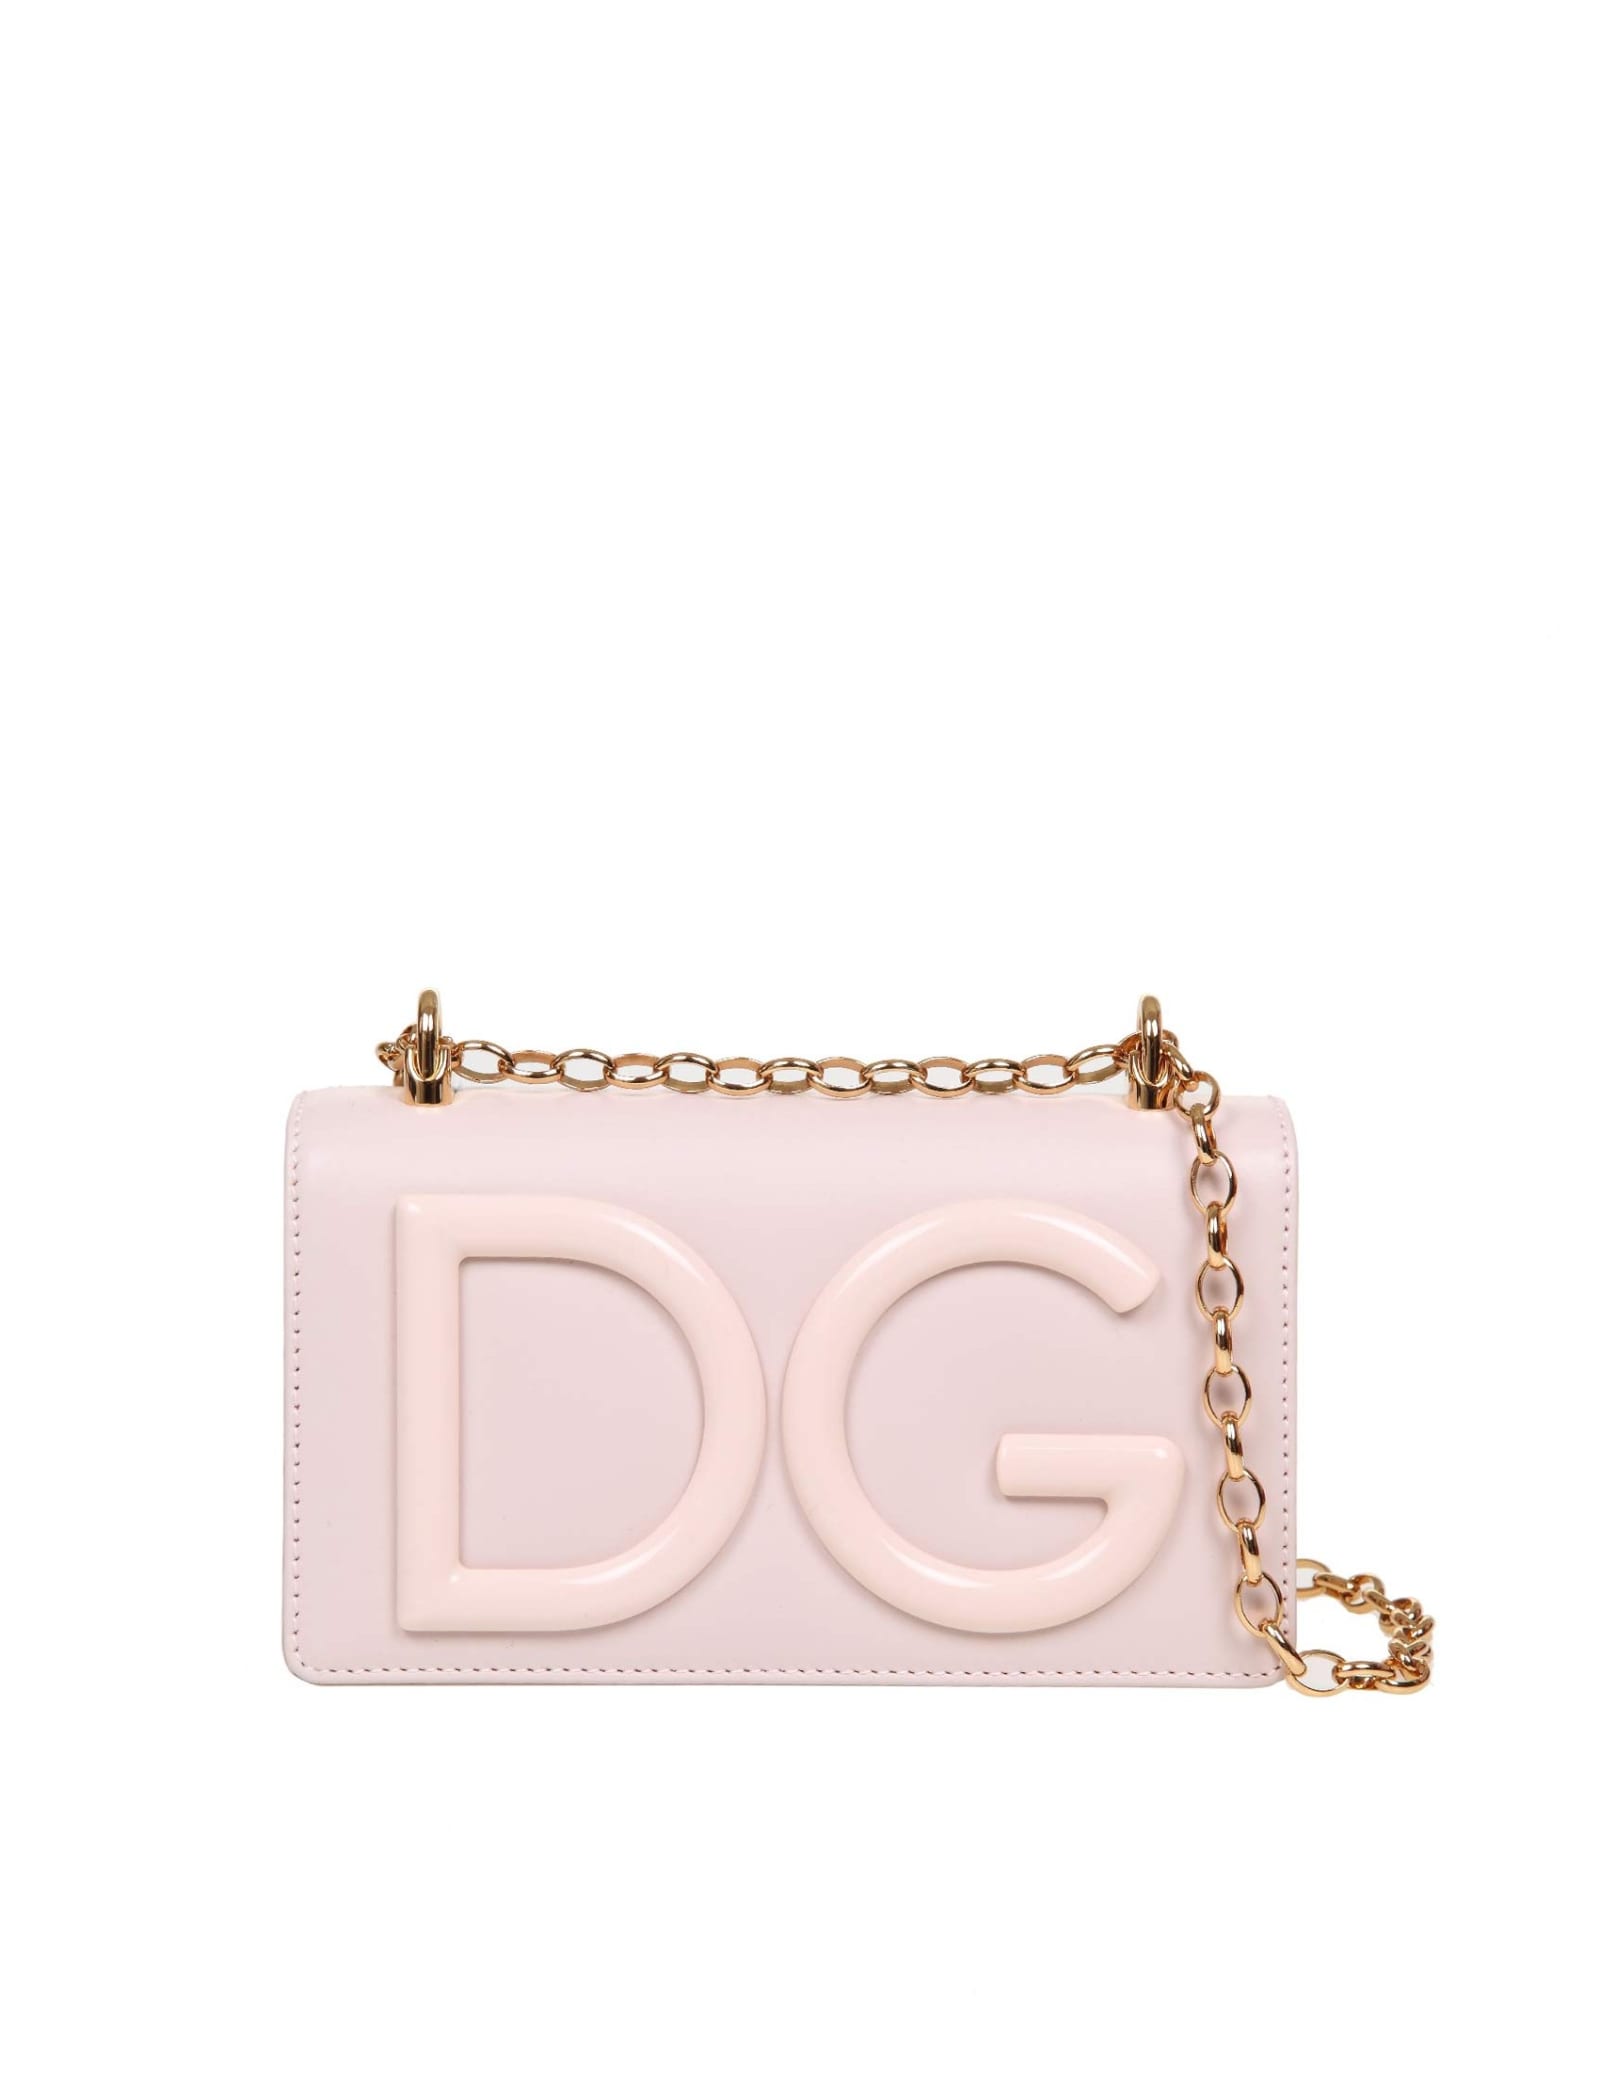 Dolce & Gabbana Phone Cover In Pink Color Leather